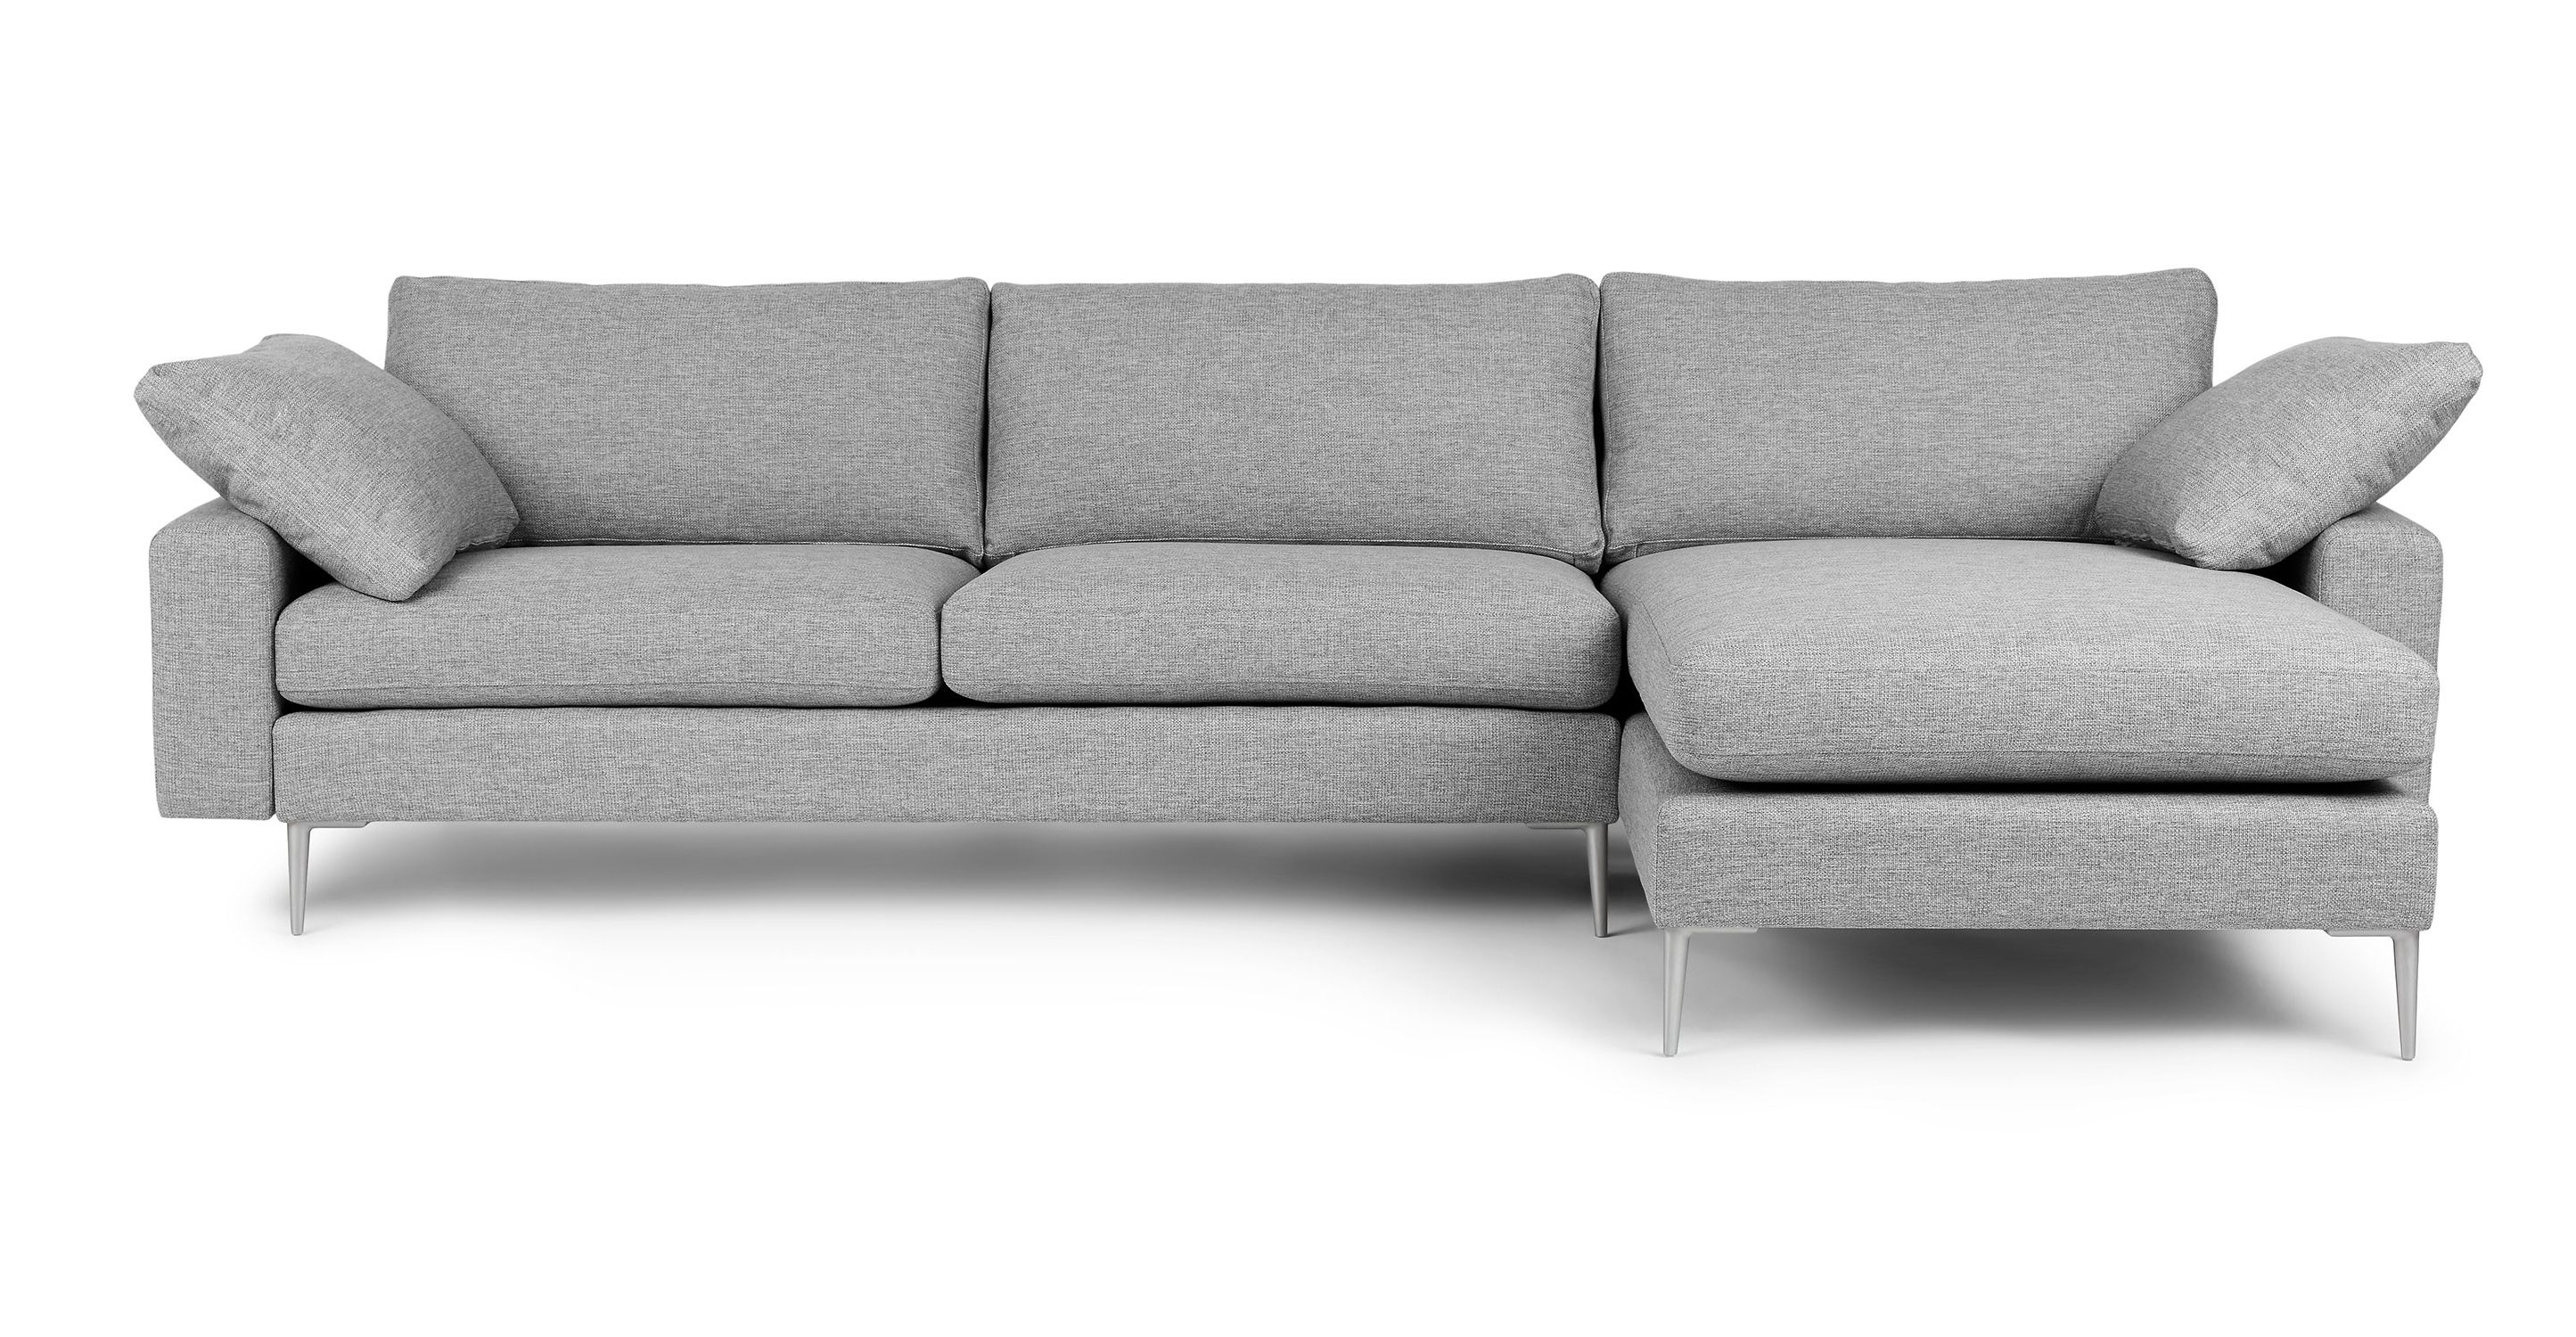 Winter Gray Reversible Fabric Sectional | Nova | Article With Reversible Sectional Sofas (View 9 of 20)